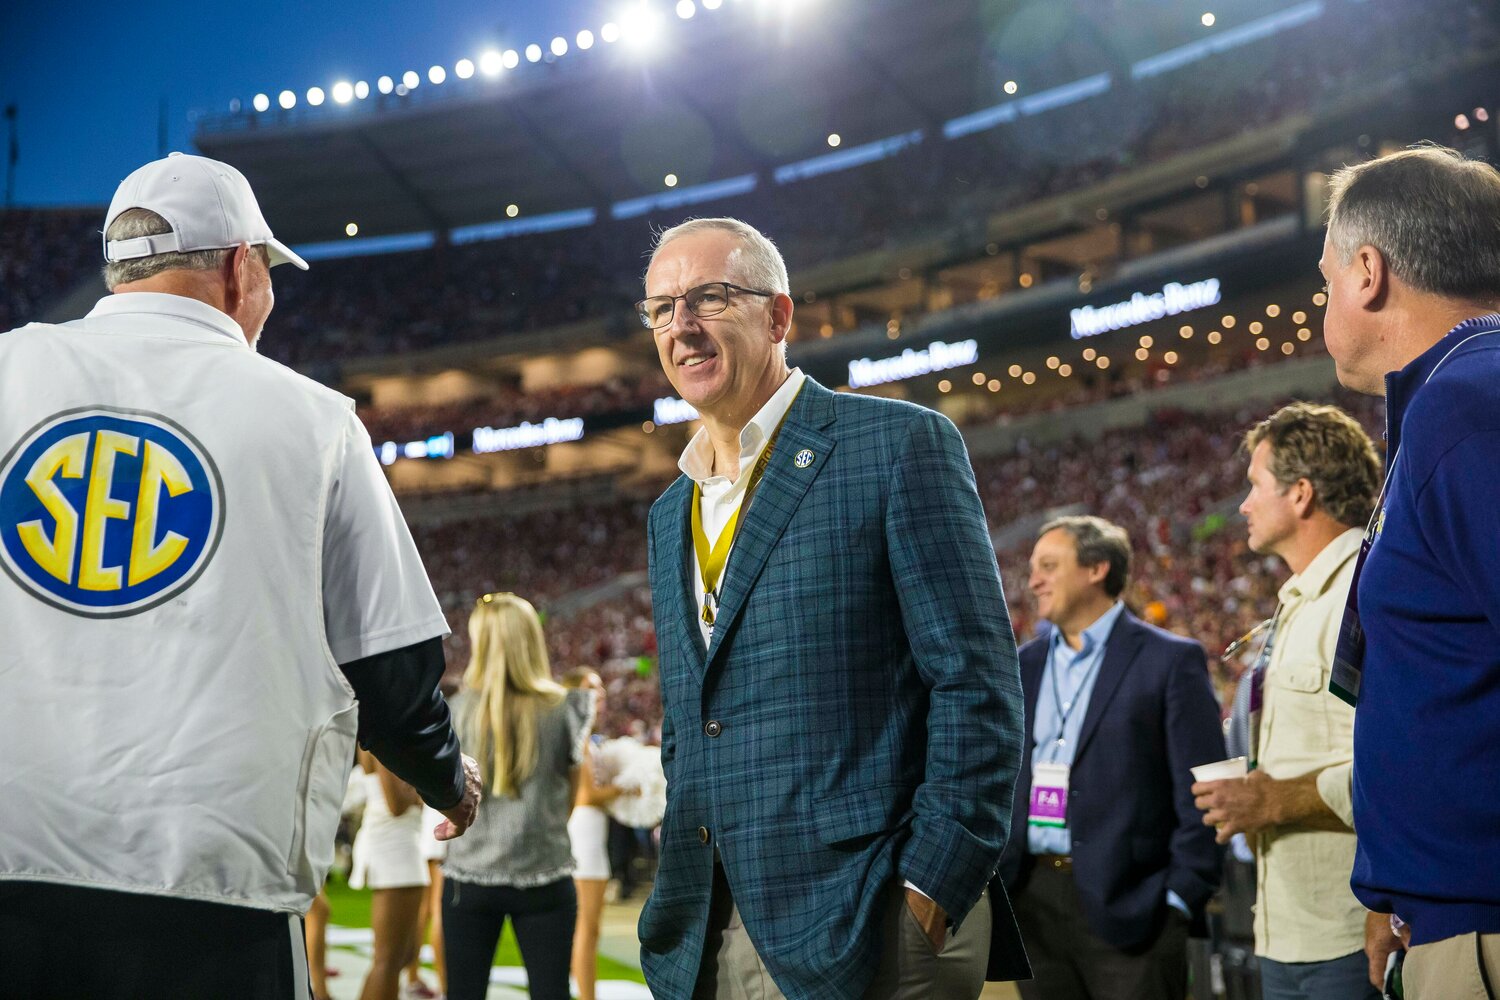 Southeastern Conference Commissioner Greg Sankey watches the first half of a college football game between Tennessee and Alabama on Oct. 23, 2021, in Tuscaloosa, Ala. Sankey was recently back in Utica where he worked for two years in the late 1980s.